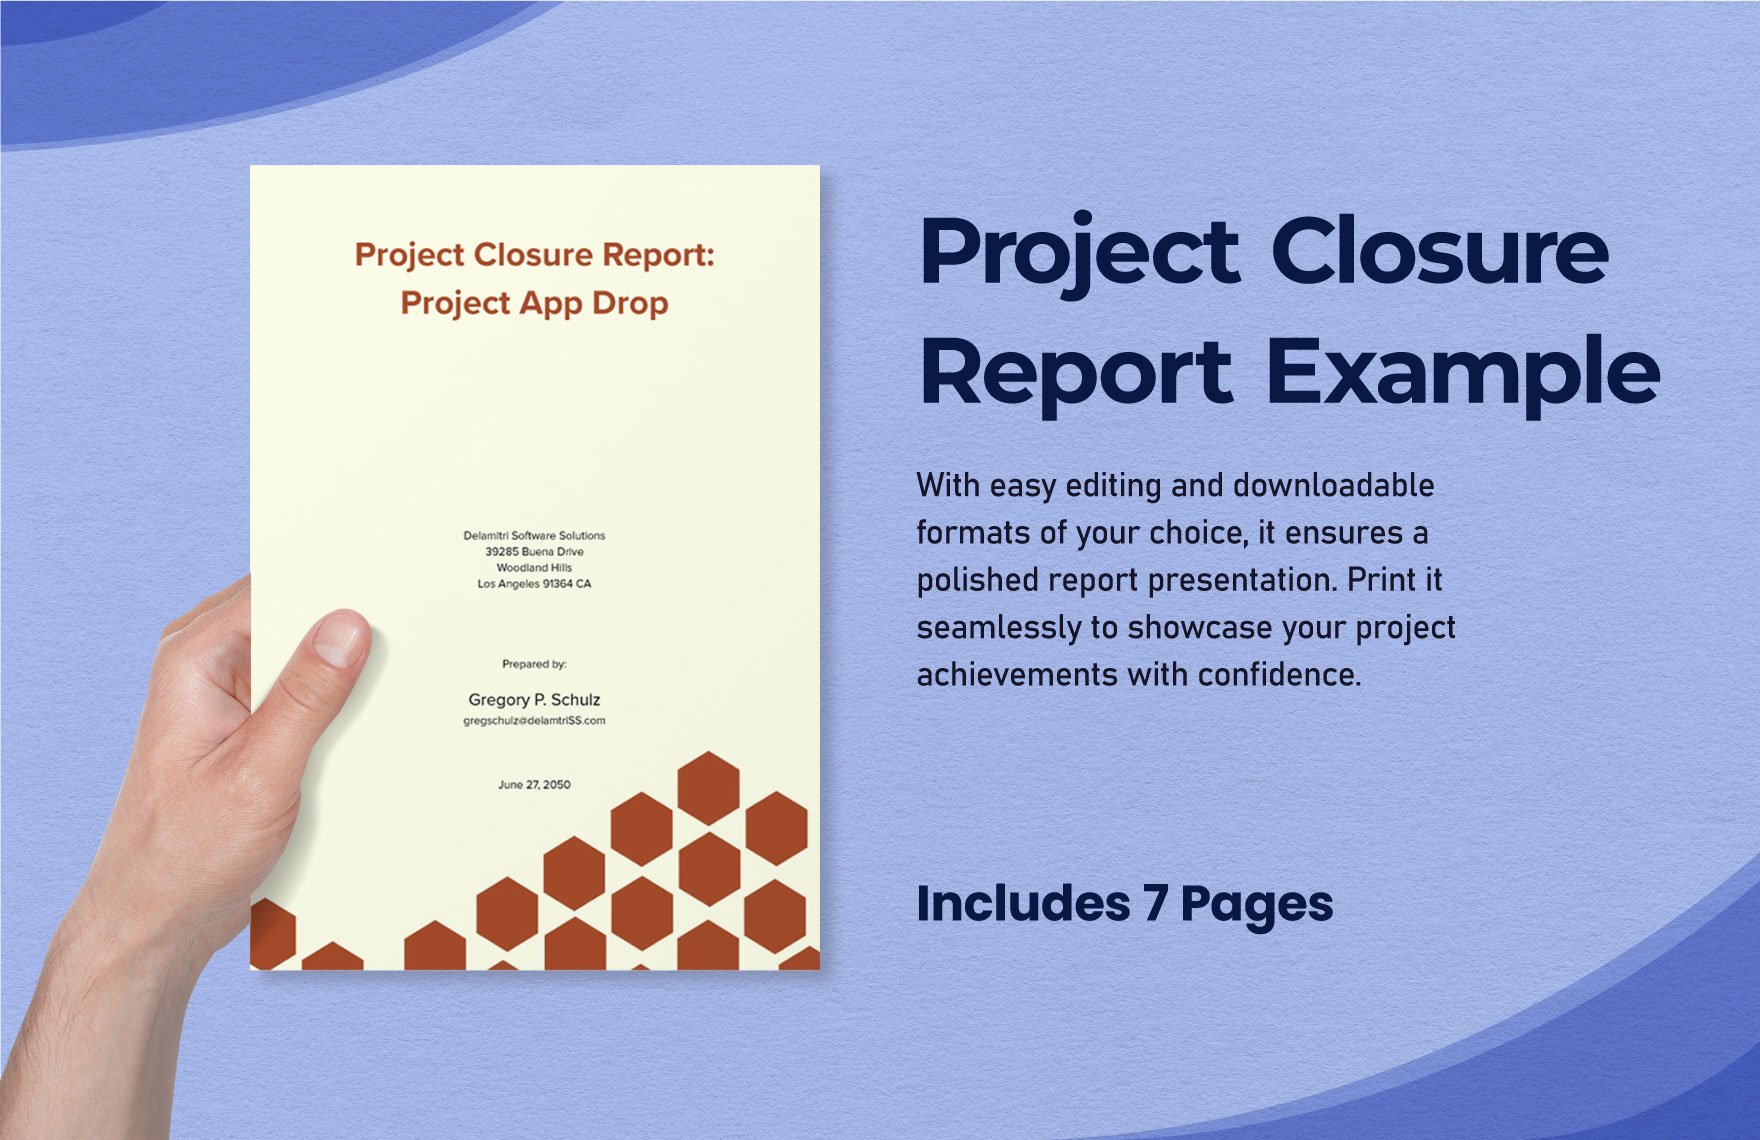 Project Closure Report Example